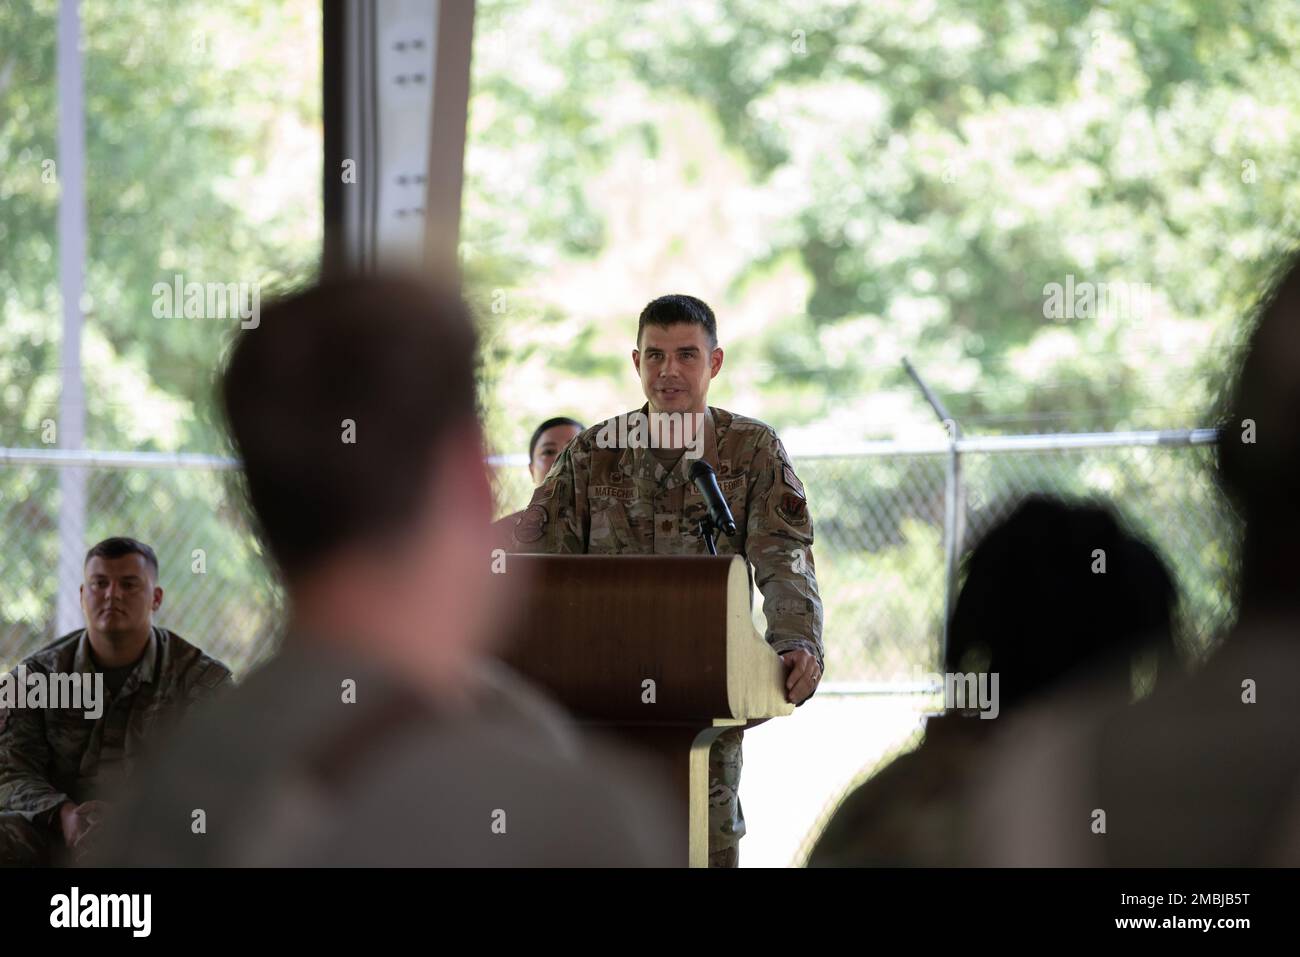 U.S. Air Force Maj. Thomas Matechik, 23rd Security Forces Squadron commander, gives a speech during military working dog TToby’s retirement at Moody Air Force Base, Georgia, June 16, 2022. Matechik spoke of the several operations TToby completed during his time in service. TToby served in four deployments conducting explosive detonation support and secret service missions. Stock Photo